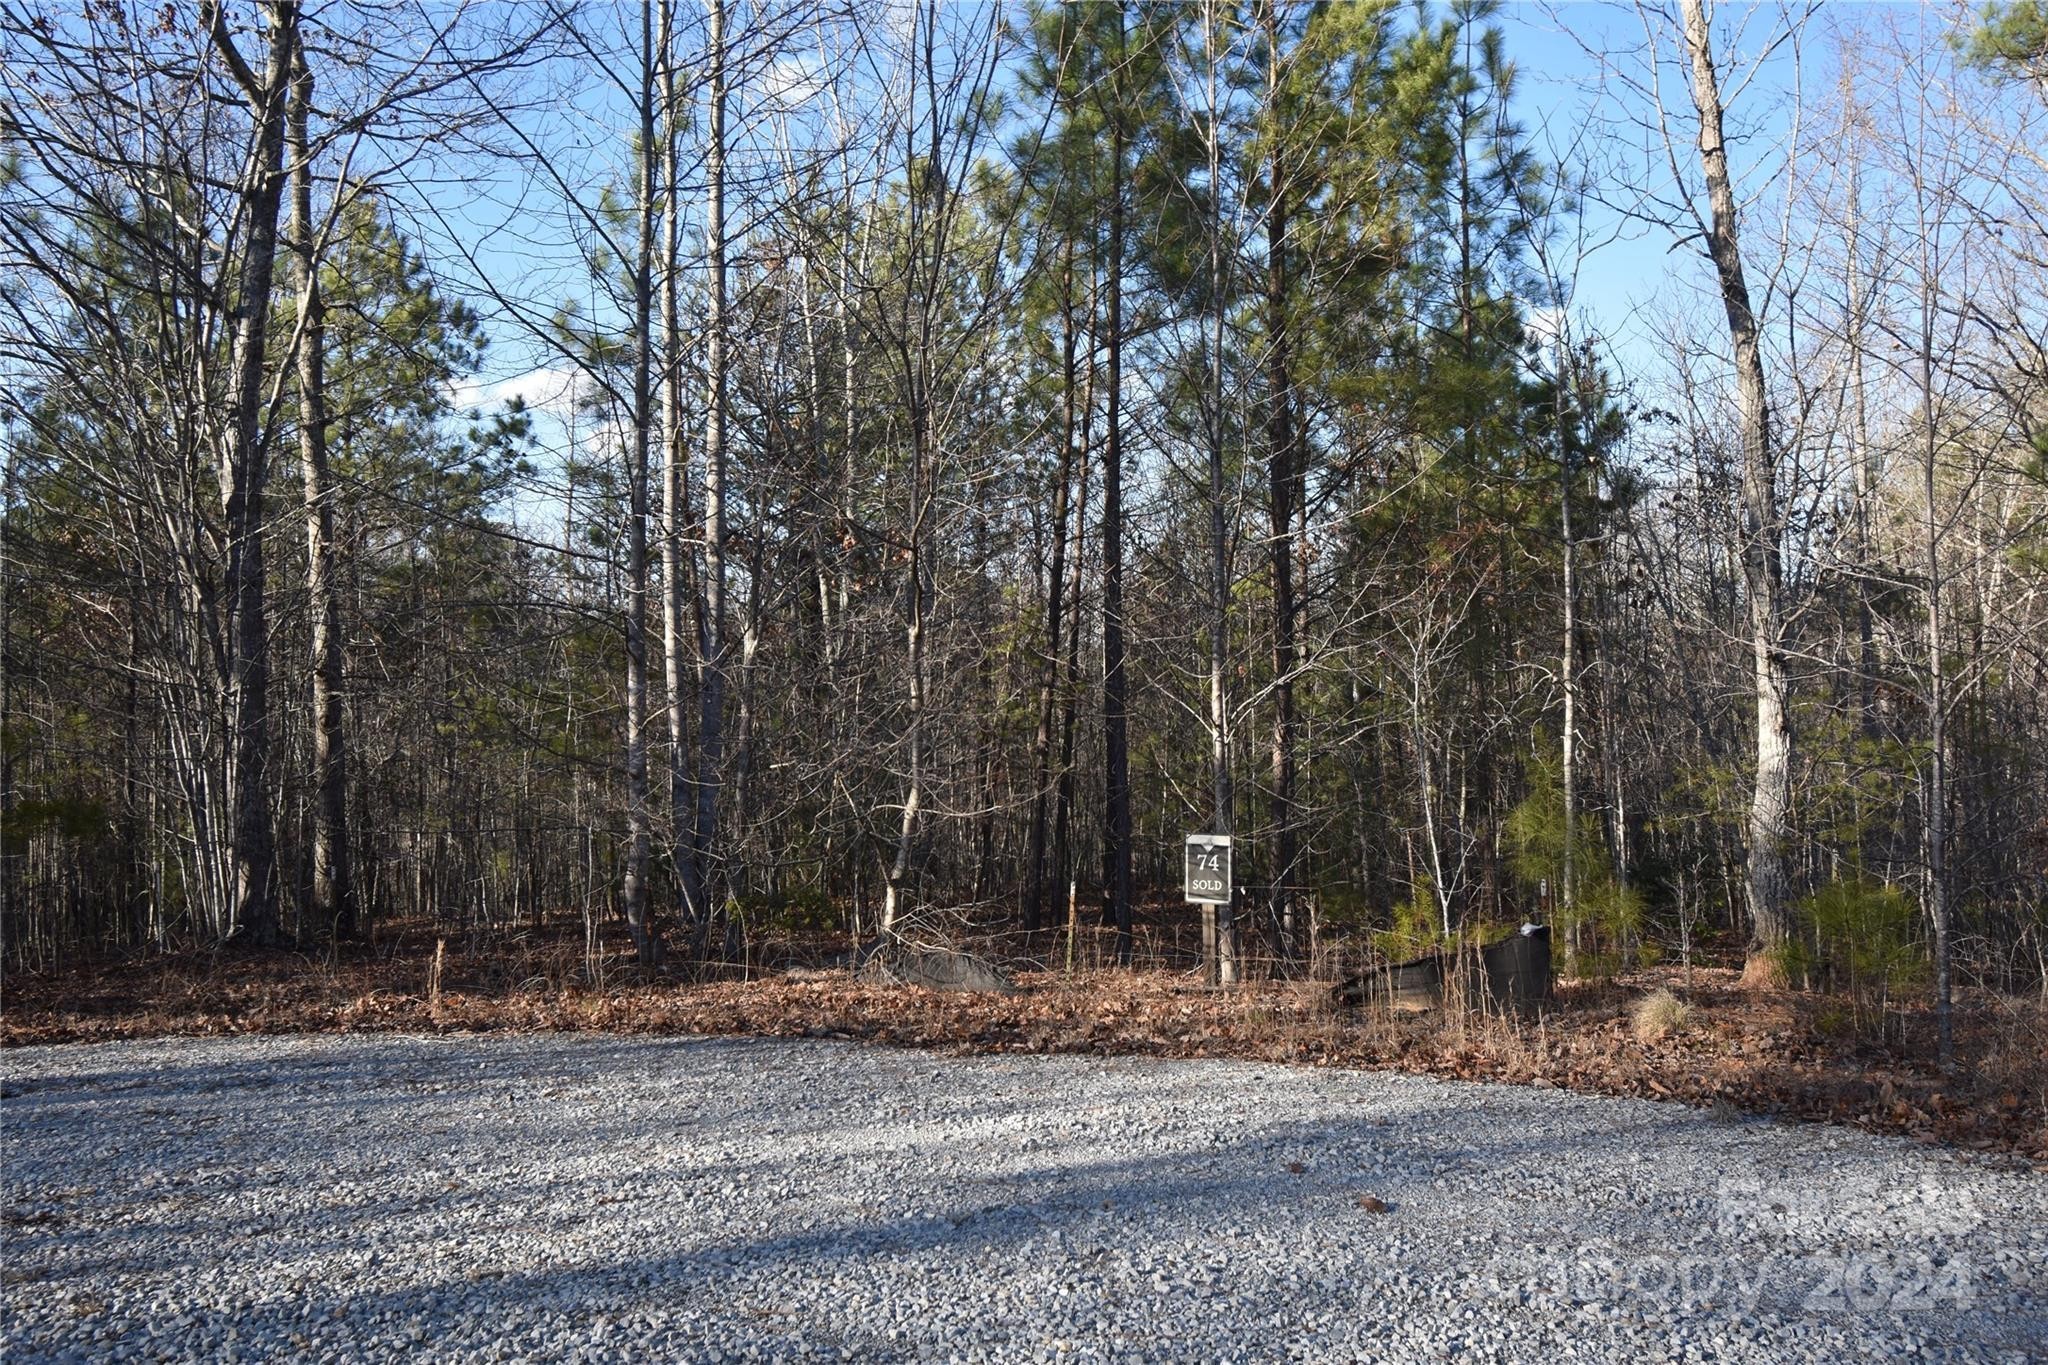 2. Lot 74 Tayberry Drive